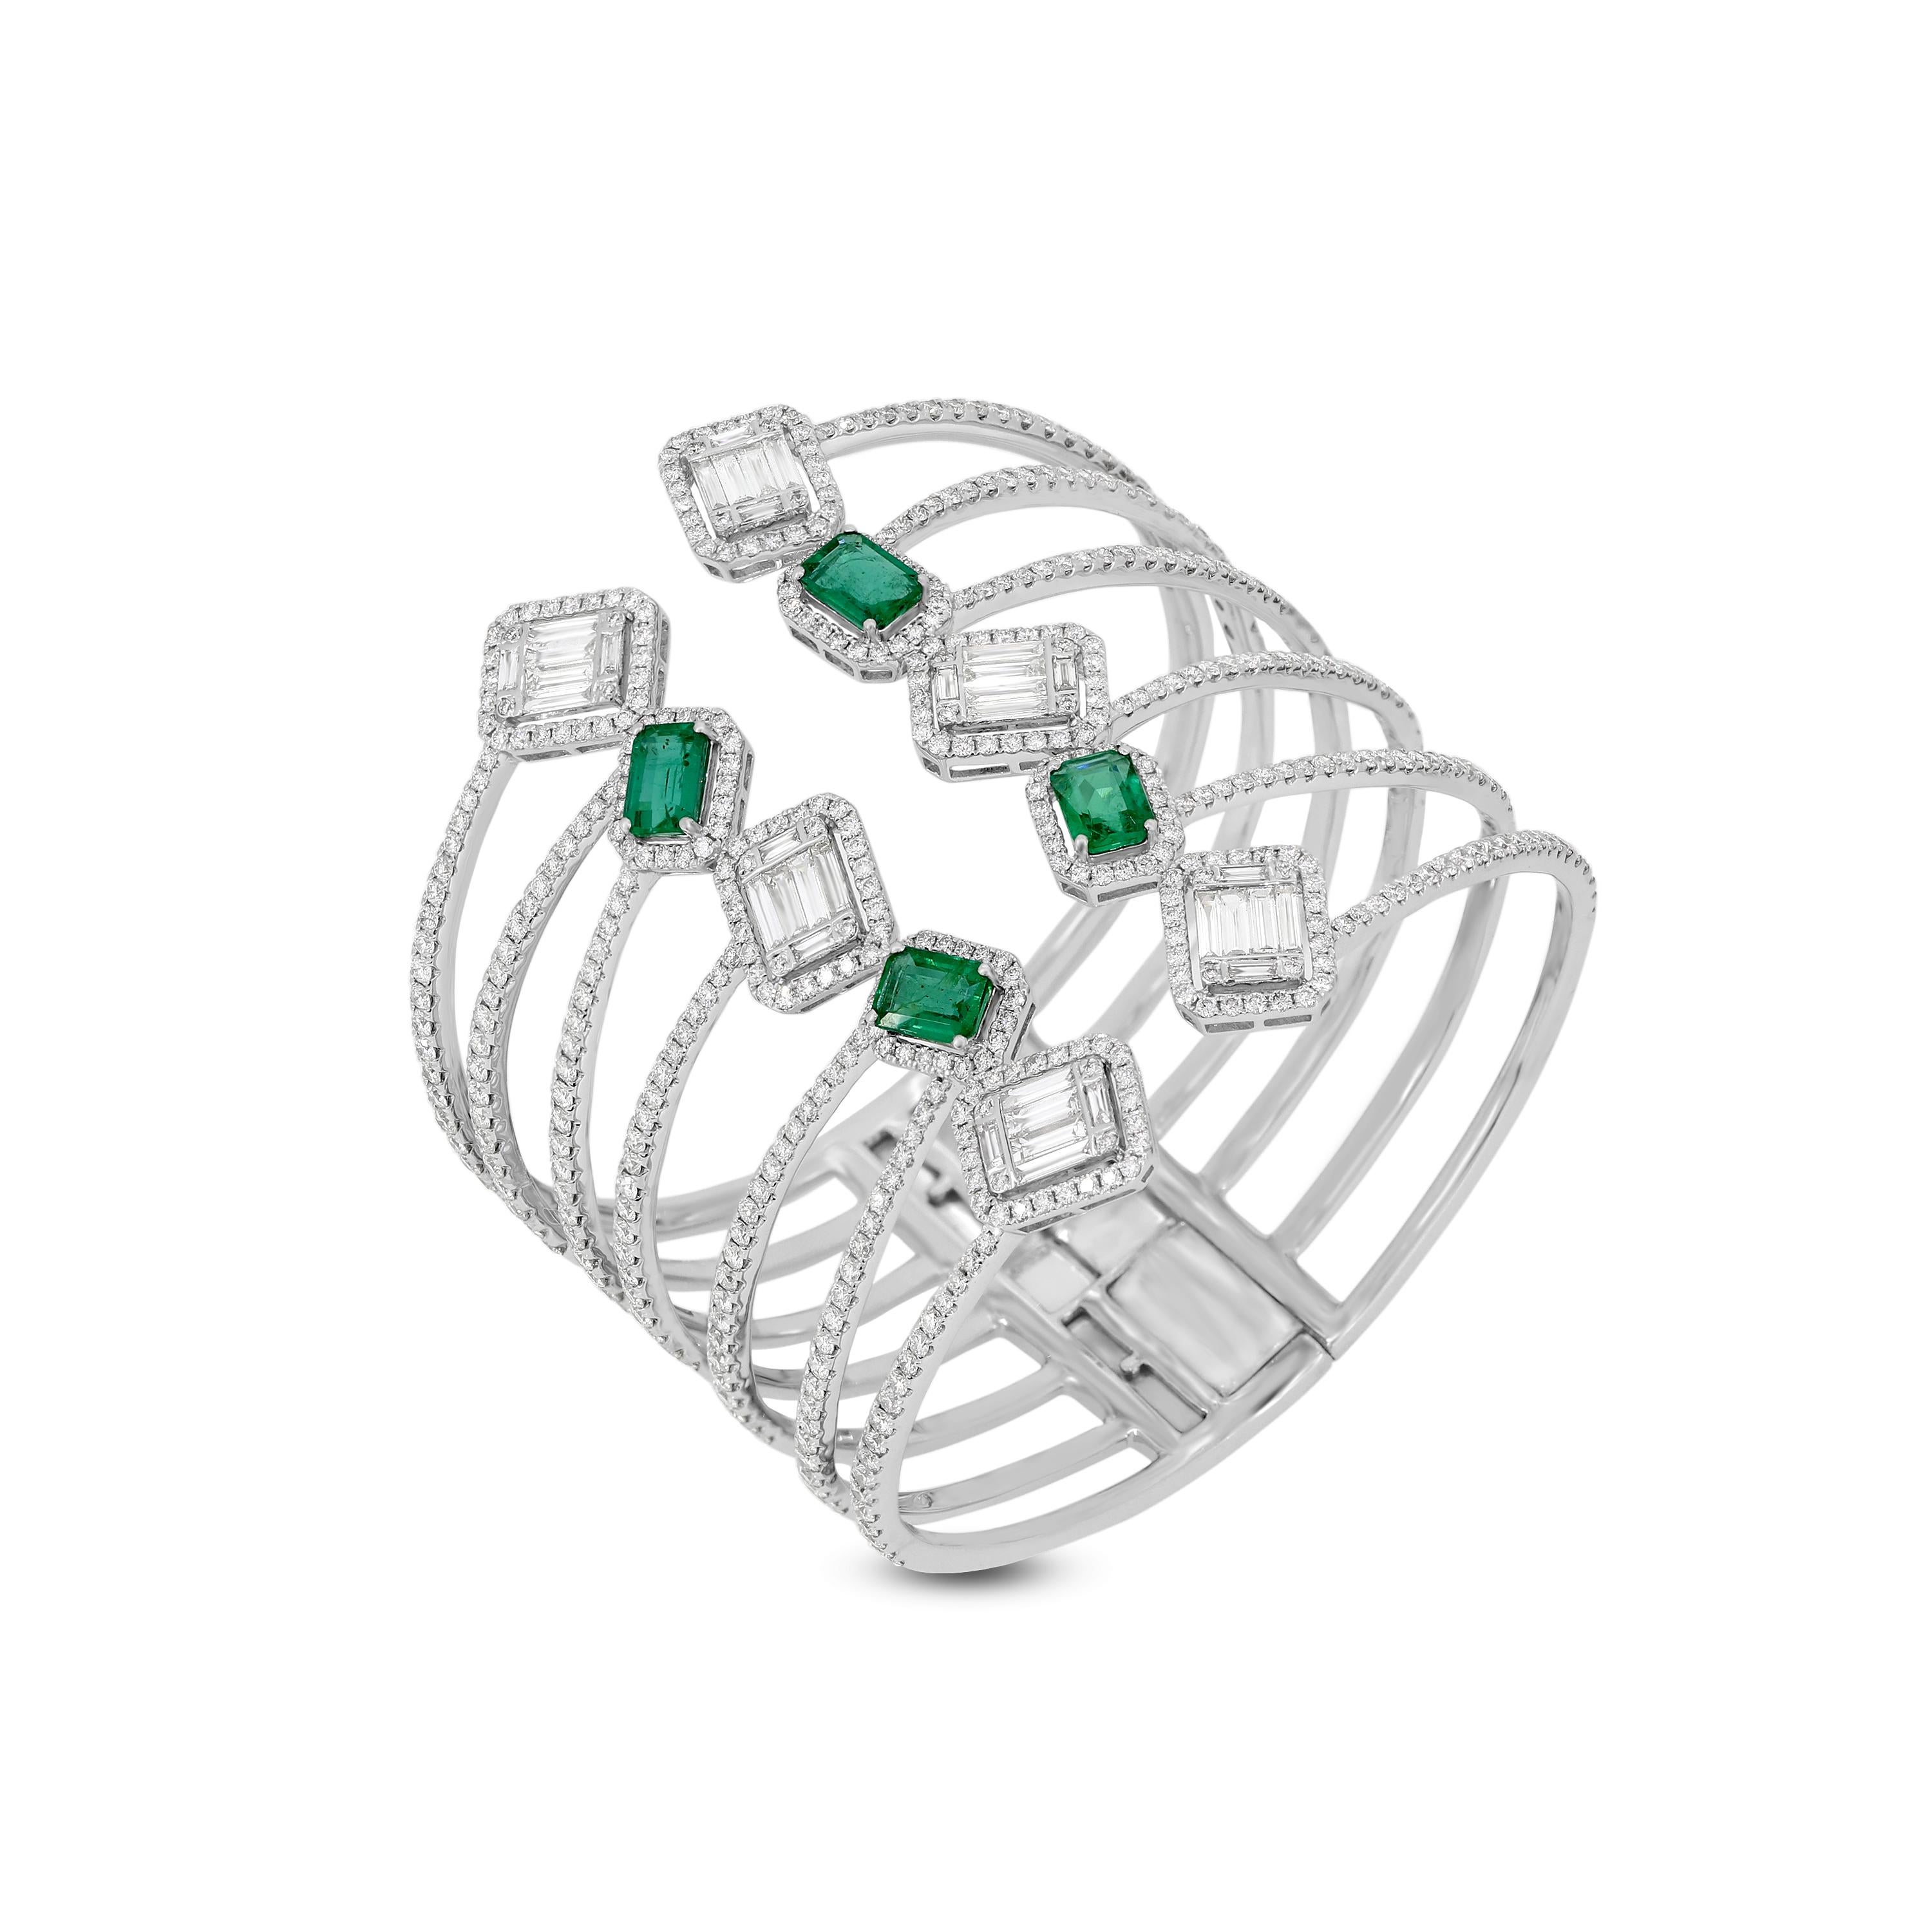 This glamorous cuff bangle in 18K white gold is a show stopper. Each bangle comes with over 10Cts of diamonds in varied shapes and 4 emeralds. The flexible design gives you the ability to wear in most hands.
JEWELRY SPECIFICATION:
Gross Weight: